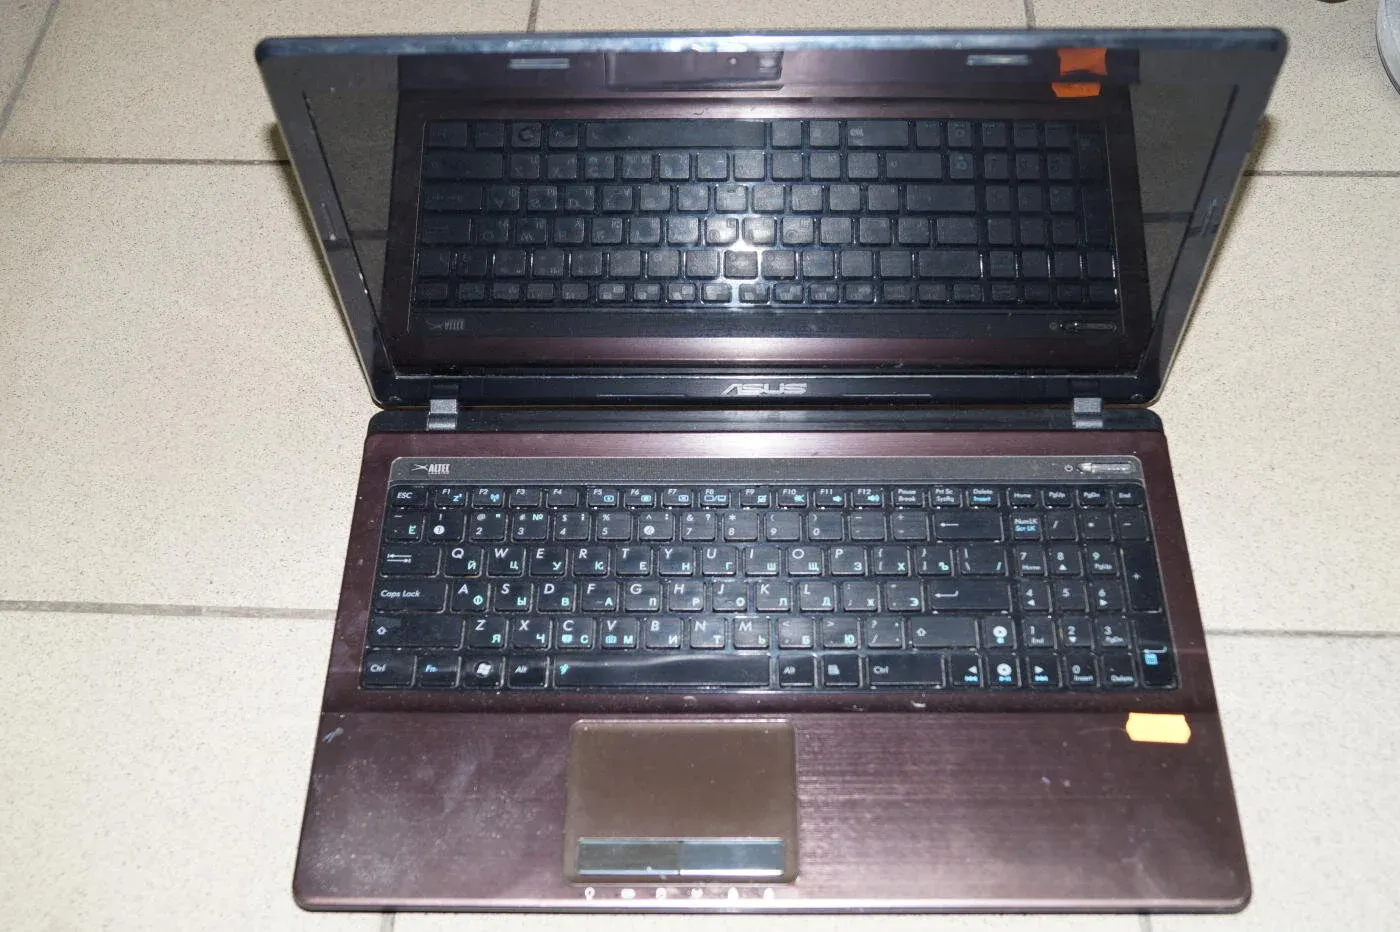 53 сд. ASUS k53sd-sx1327r. ASUS k53sd-sx1175r. Ноутбук ASUS k53sd-sx141r. K53sd.